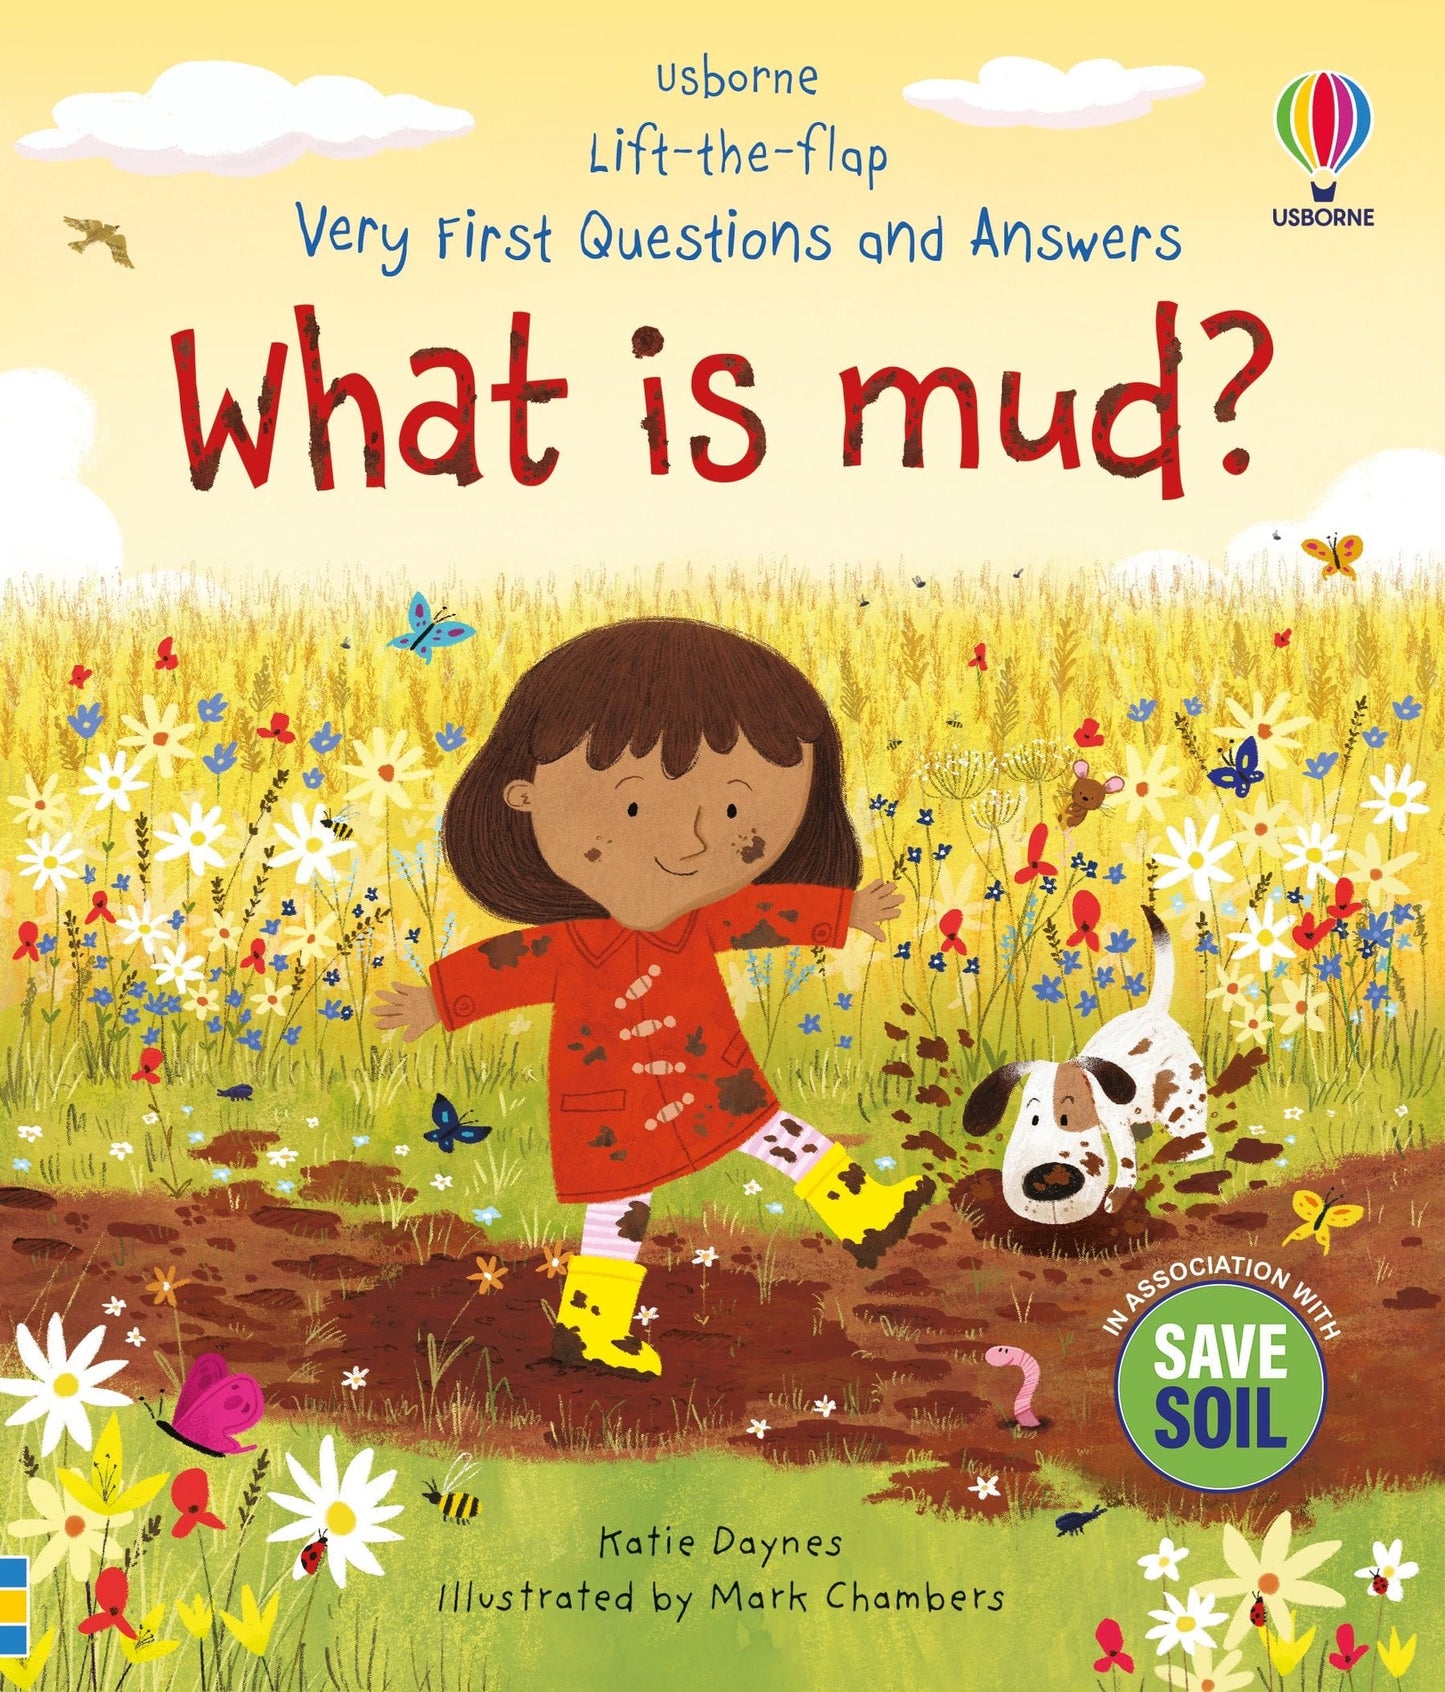 Usborne Very First Questions and Answers: What is mud? Katie Daynes  Illustrated by Mark Chambers